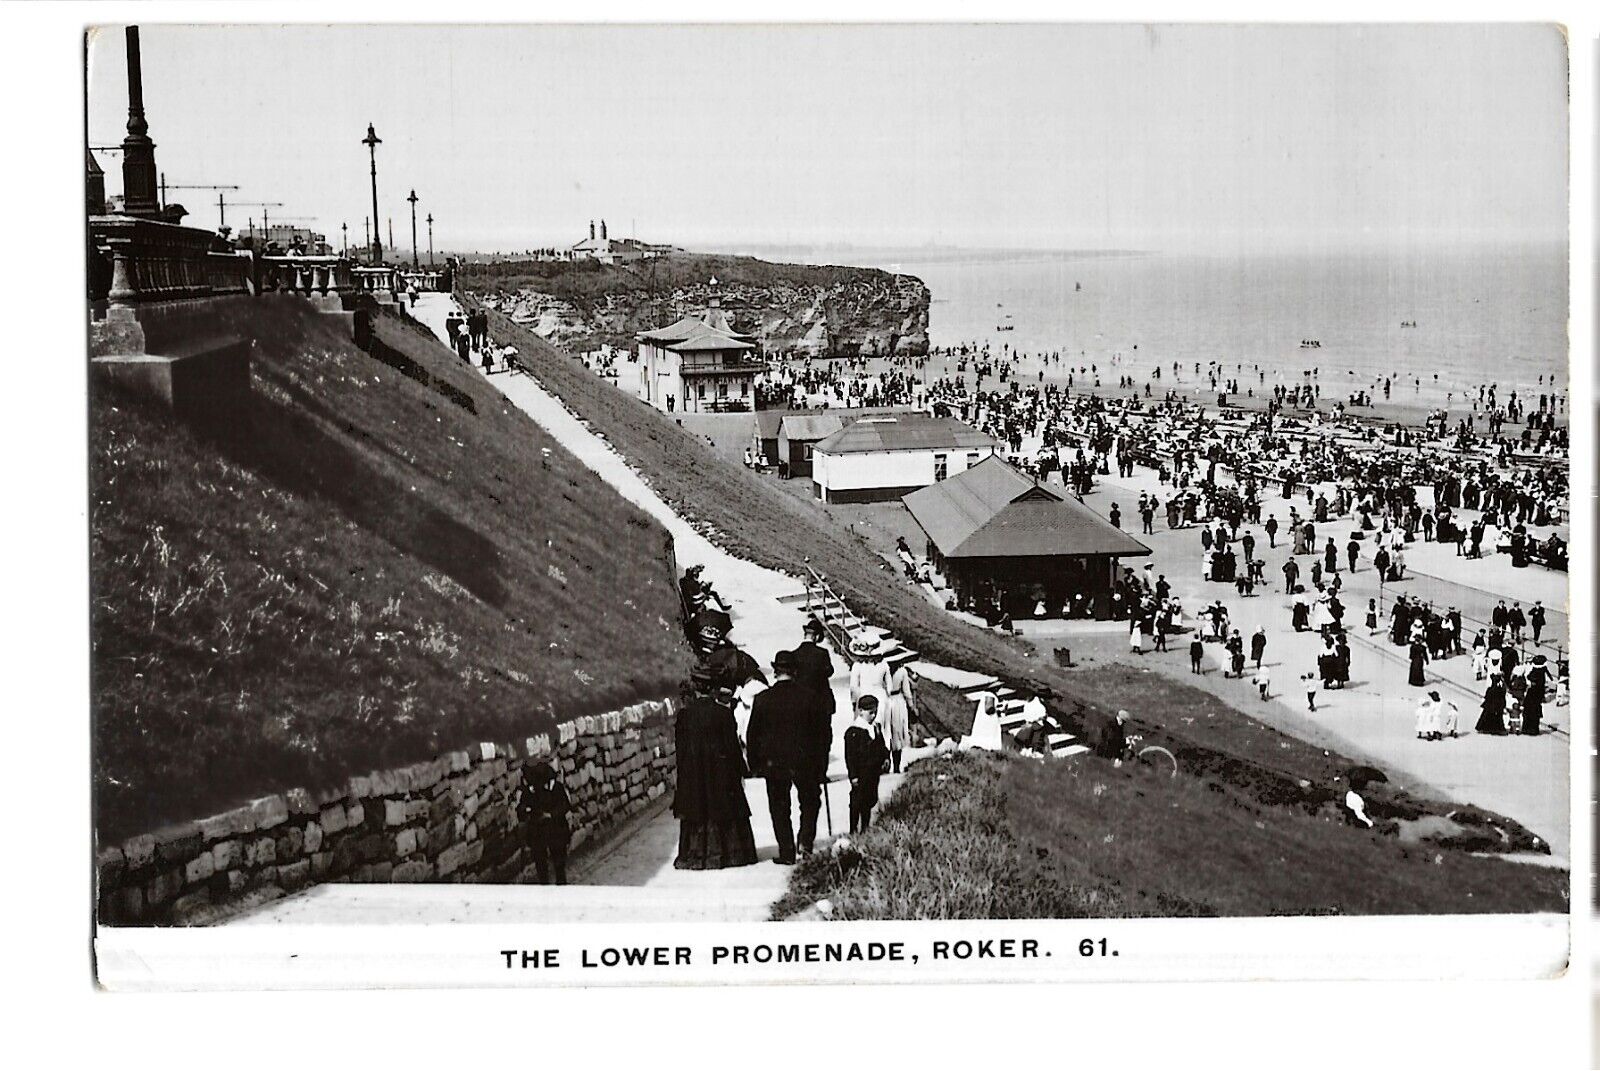 House Clearance - Durham. The Lower Promenade, Roker. R/P by Cope of Sunderland.